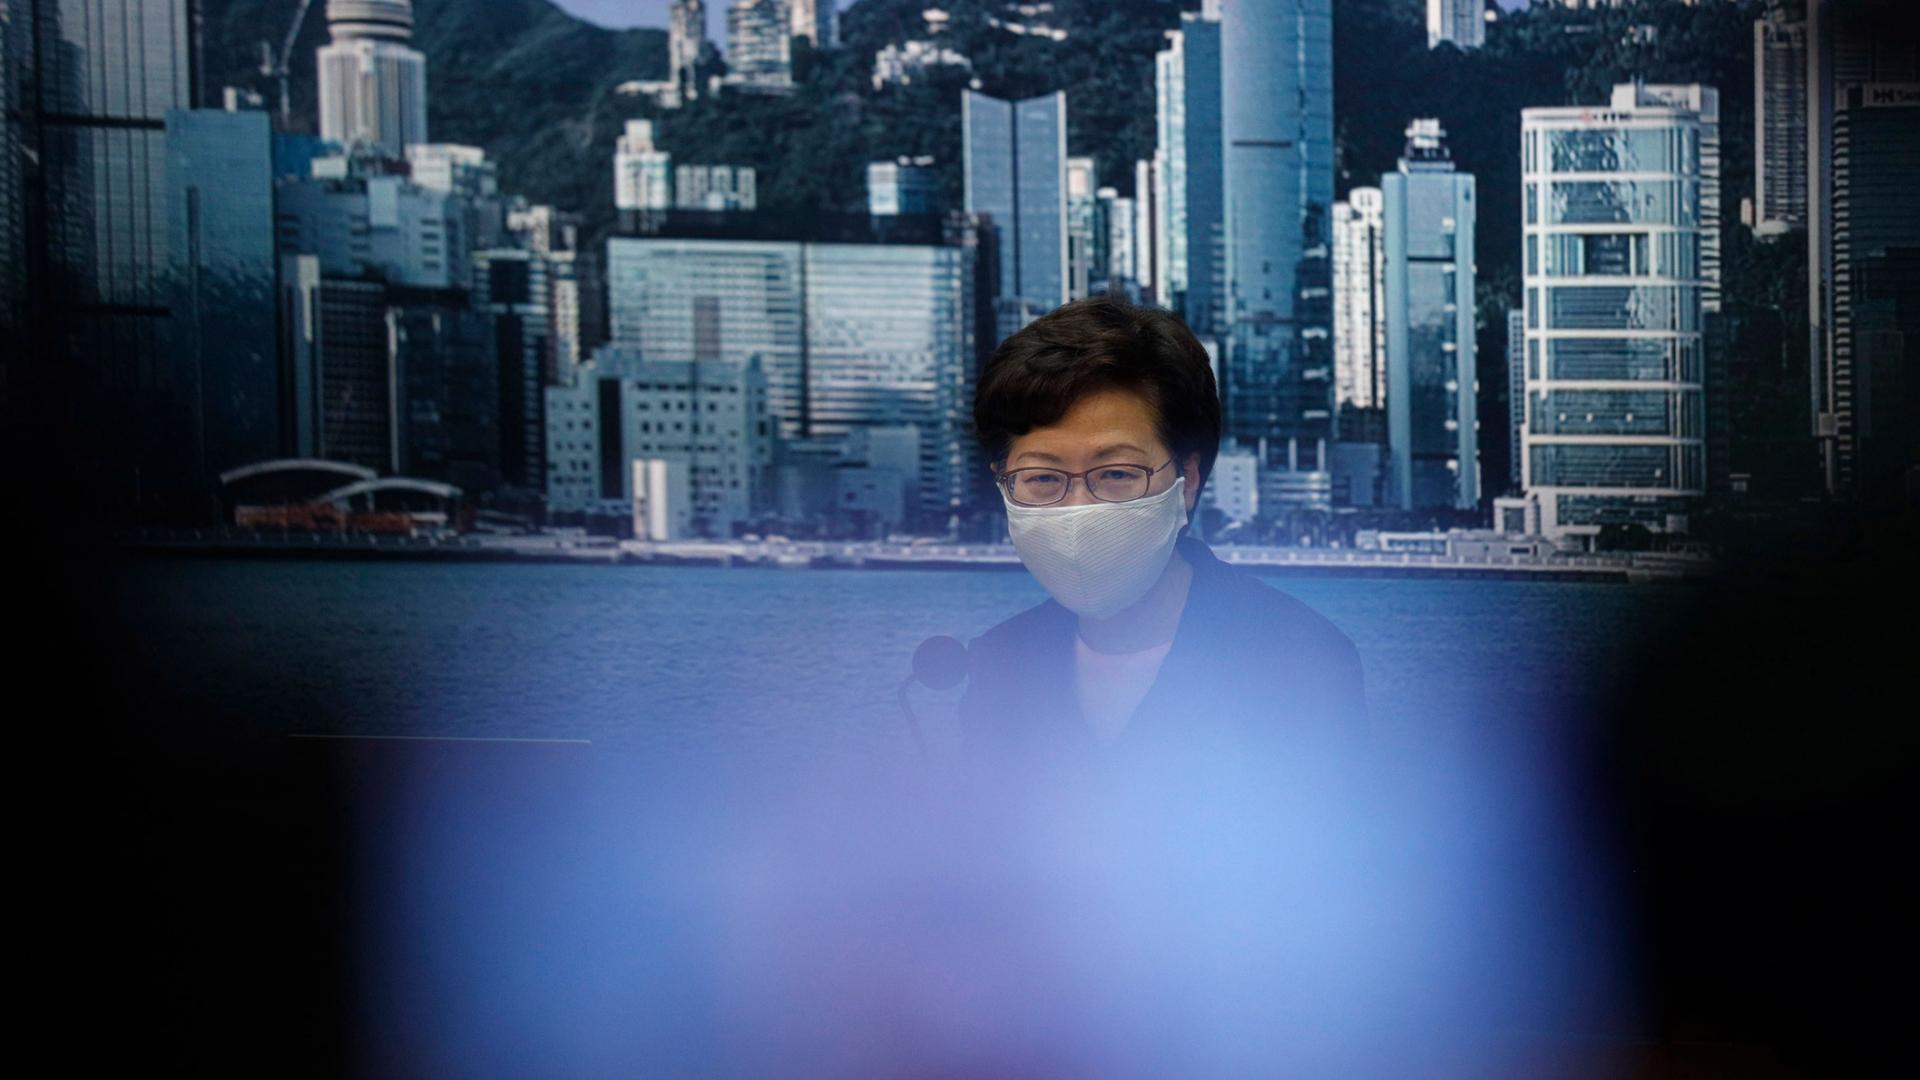 Hong Kong Chief Executive Carrie Lam is shown wearing a face mask with an image of the Hong Kong coastline in the background.